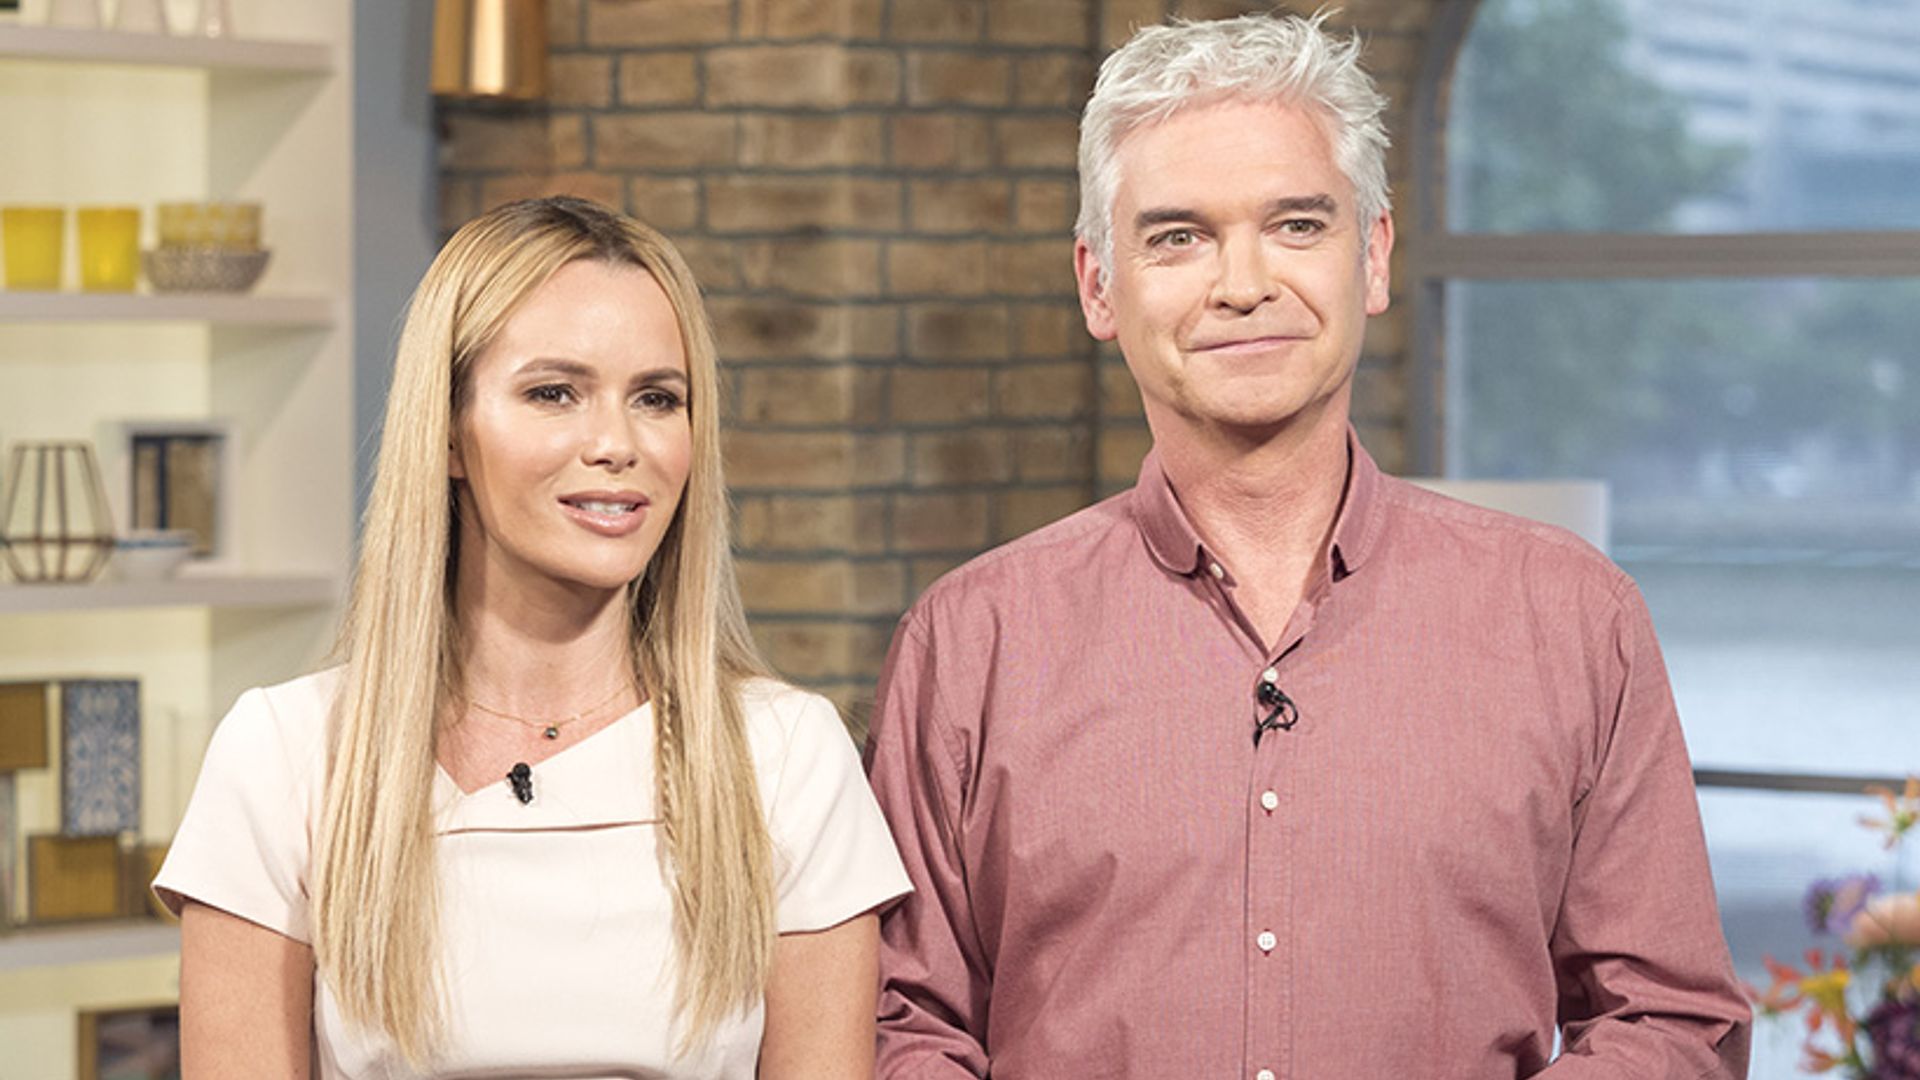 Amanda Holden and Phillip Schofield presenting together